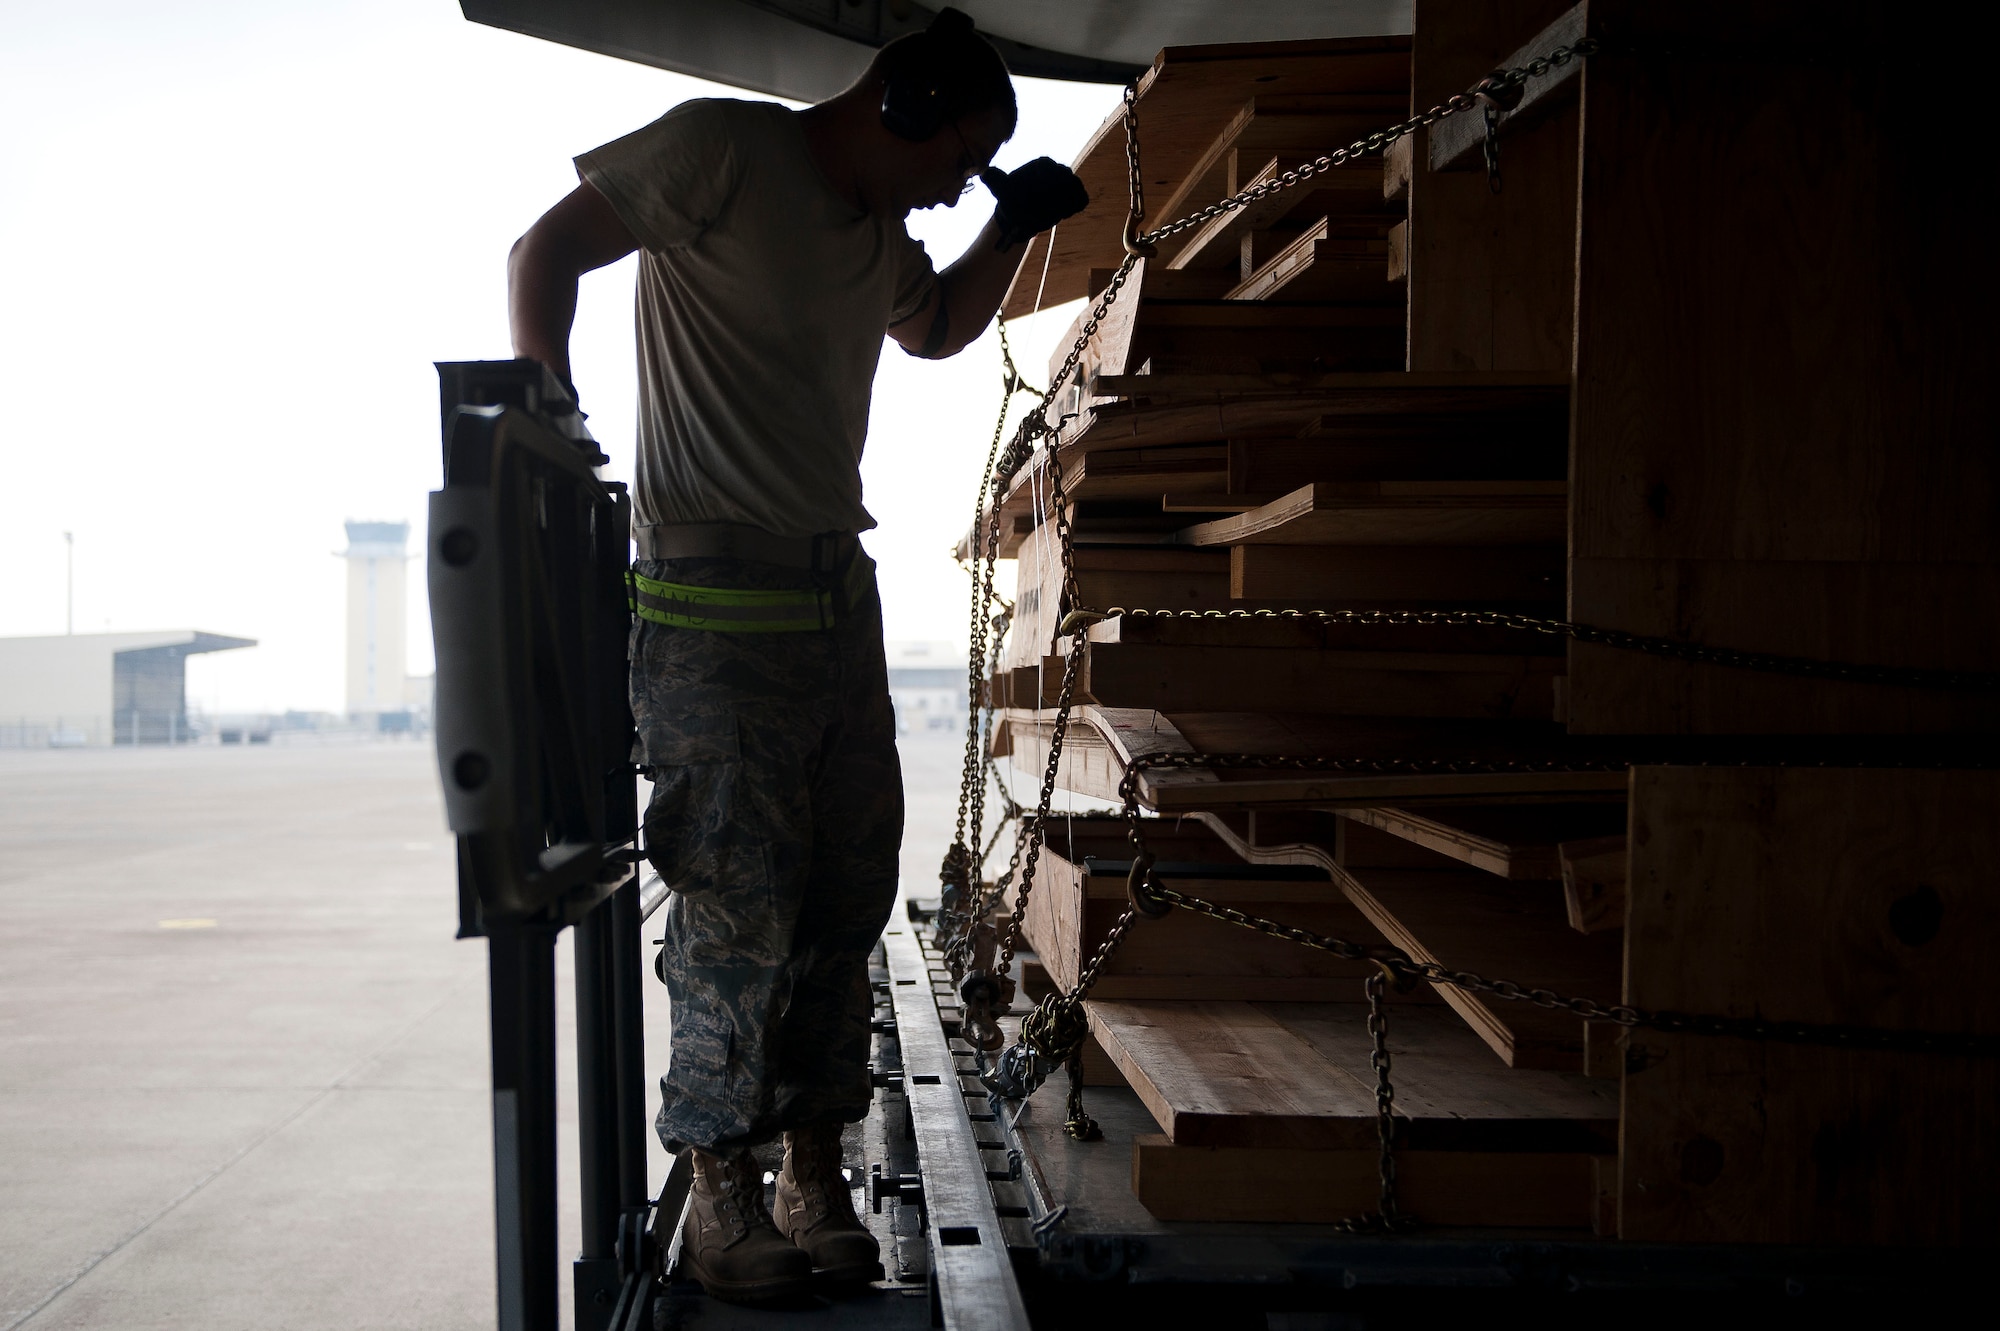 Staff Sgt. Nicolas Pantoja, 728th Air Mobility Squadron Aerial Port Flight, wipes away sweat while loading cargo onto a C-17 Globemaster III aircraft July 11, 2011, at Incirlik Air Base, Turkey. The aerial port flight is responsible for transportation-related functions including the movement of freight bound for Europe, Africa, and Southwest and Central Asia. (U.S. Air Force photo by Tech. Sgt. Michael B. Keller/Released)